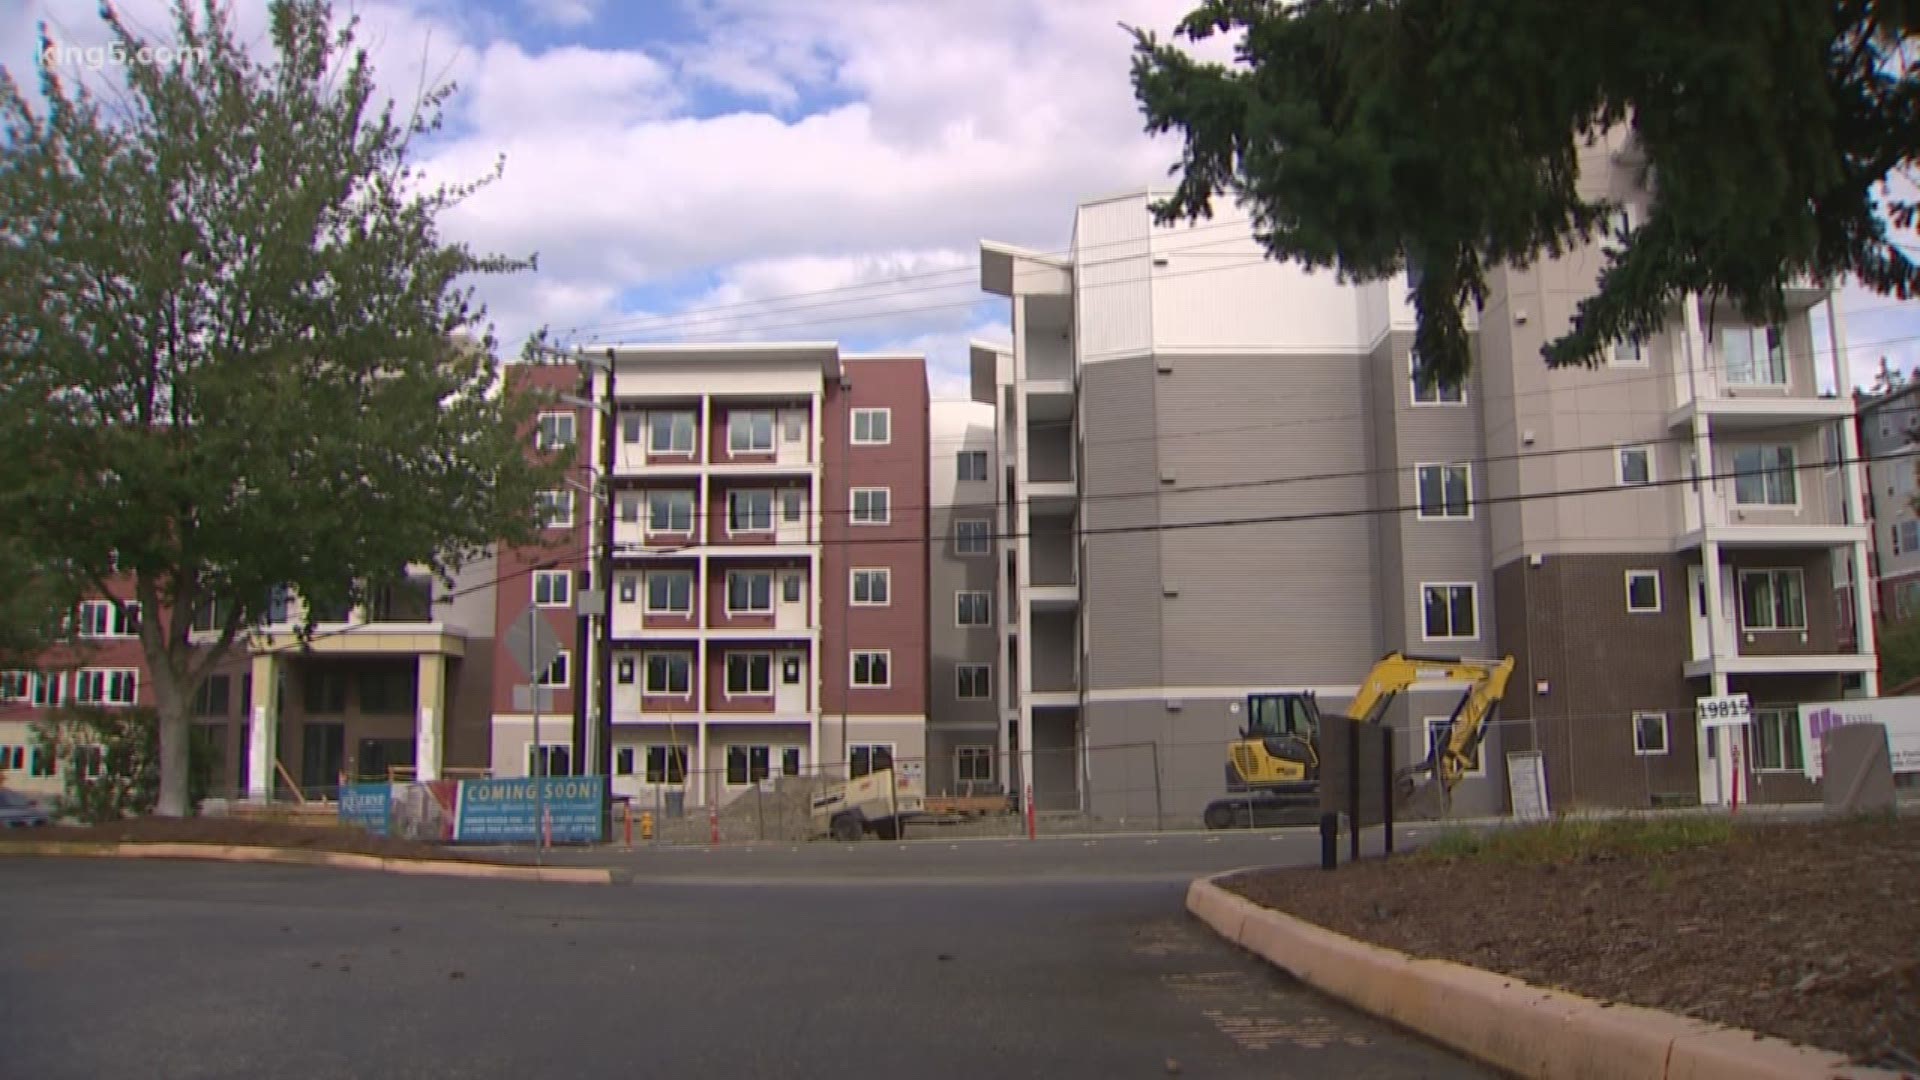 New tenant protection laws start July 28 in Washington state. KING 5's Tony Black reports.